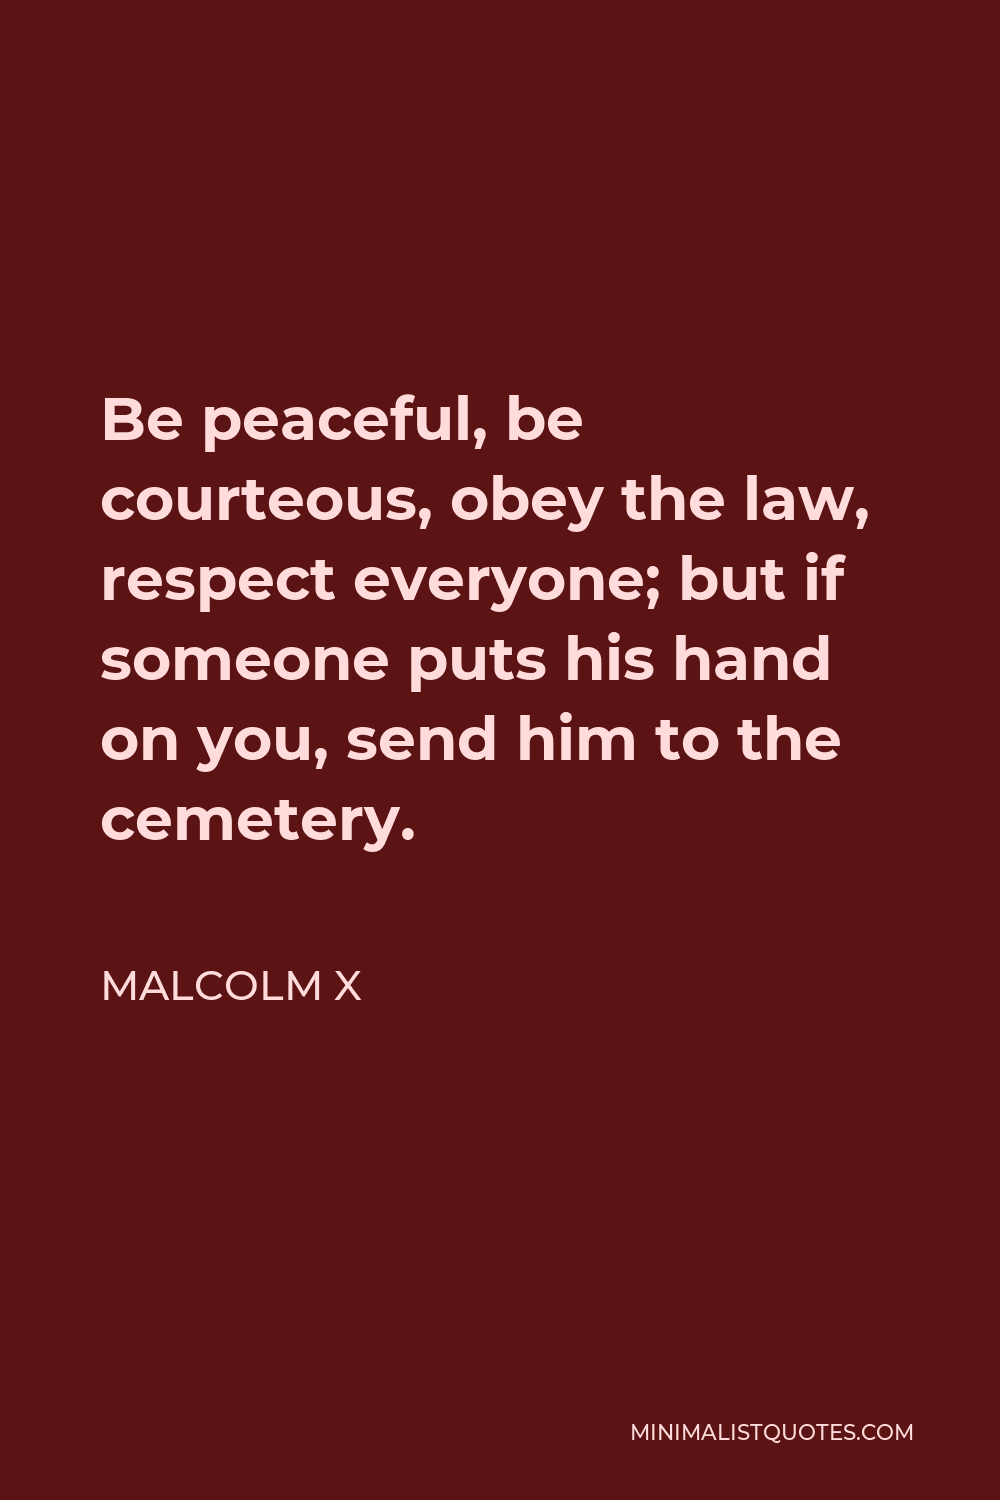 Malcolm X Quote - Be peaceful, be courteous, obey the law, respect everyone; but if someone puts his hand on you, send him to the cemetery.